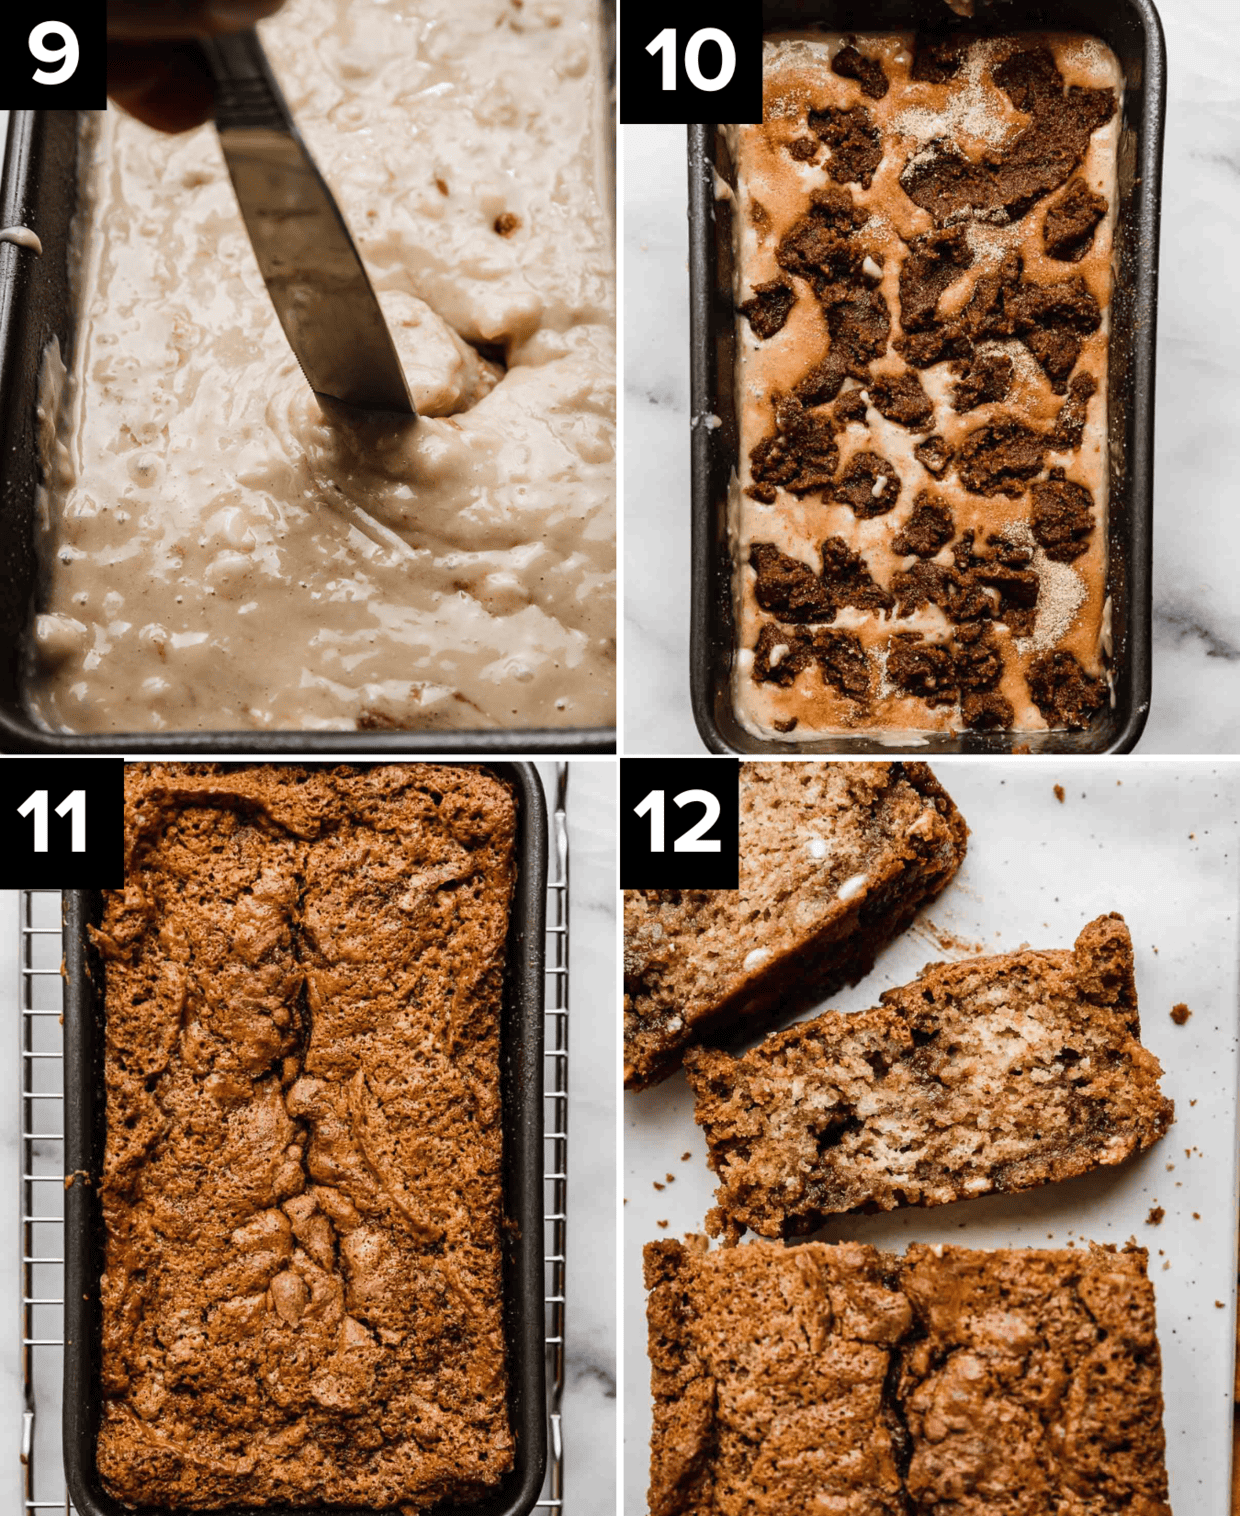 A knife sliding through Cinnamon Swirl Bread batter, (top right image) shows cinnamon sugar clusters dispersed over the batter, bottom image is baked Cinnamon Swirl Bread in a pan, bottom right image is sliced Cinnamon Swirl Bread.